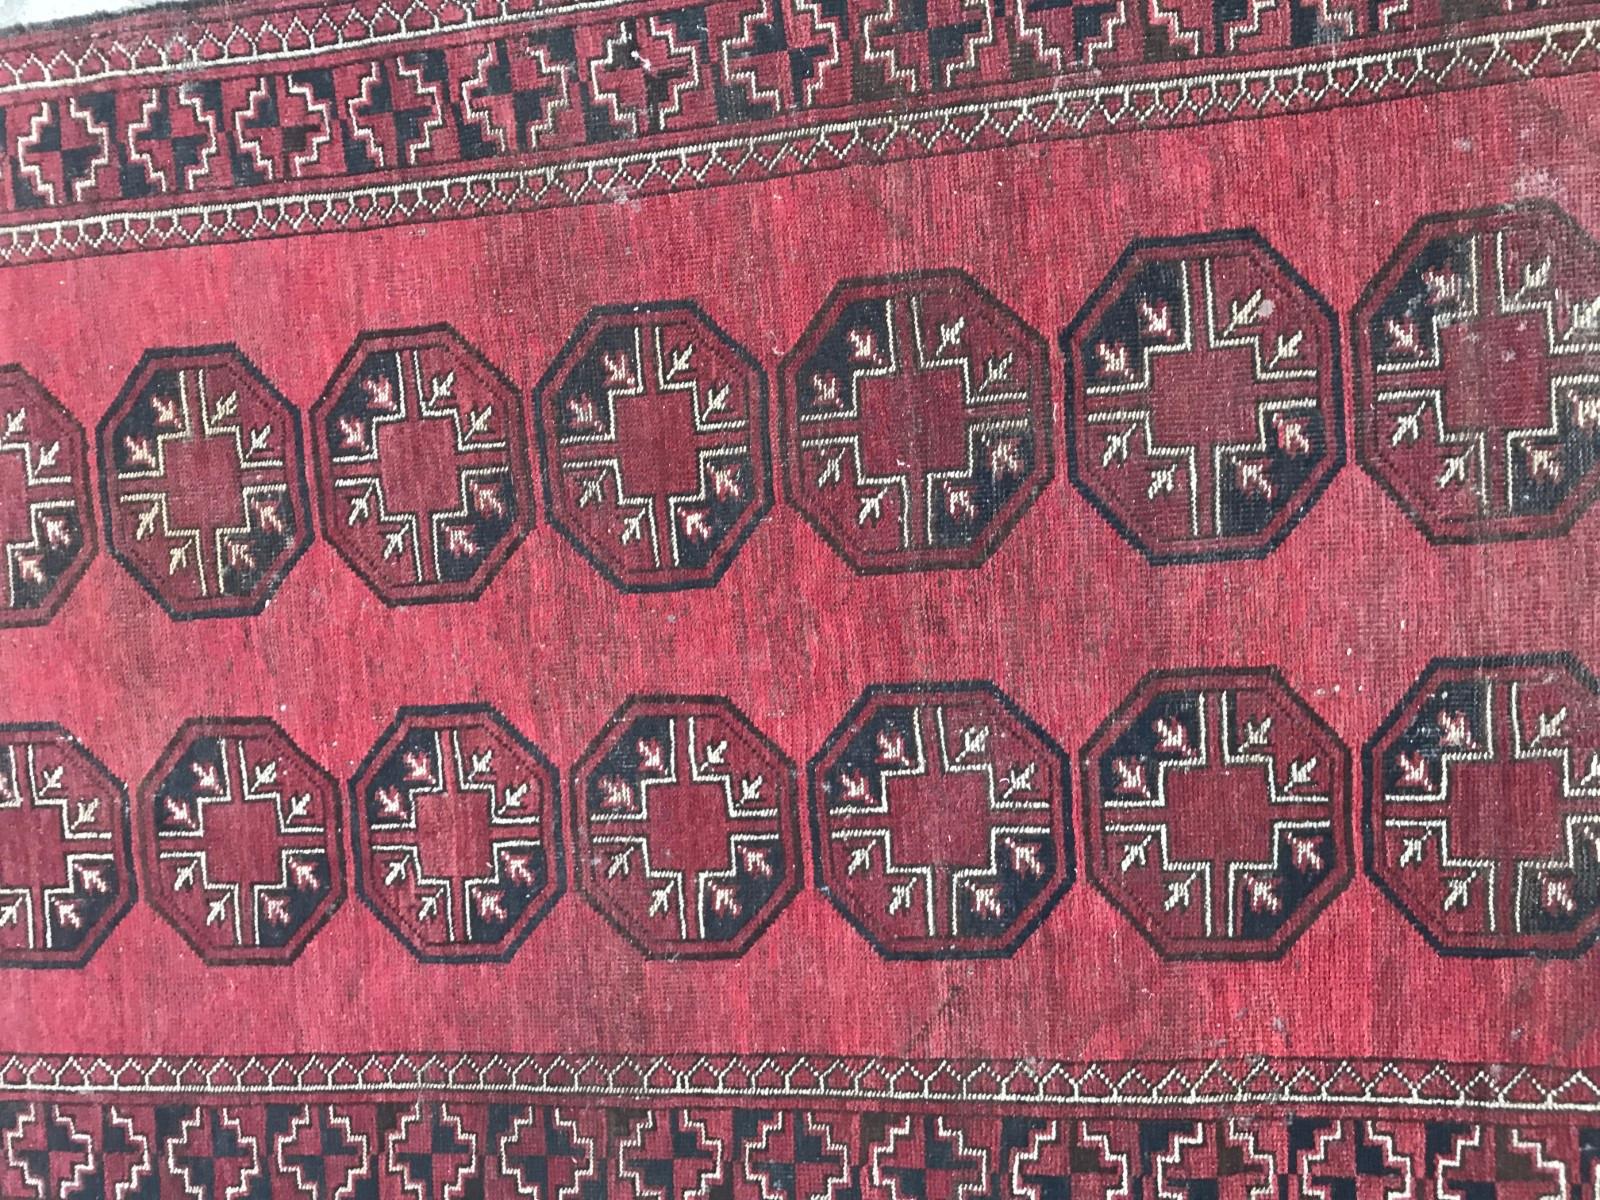 Early 20th century Afghan rug with a Turkmen design and red and black colors, entirely hand knotted with wool velvet on wool foundations.